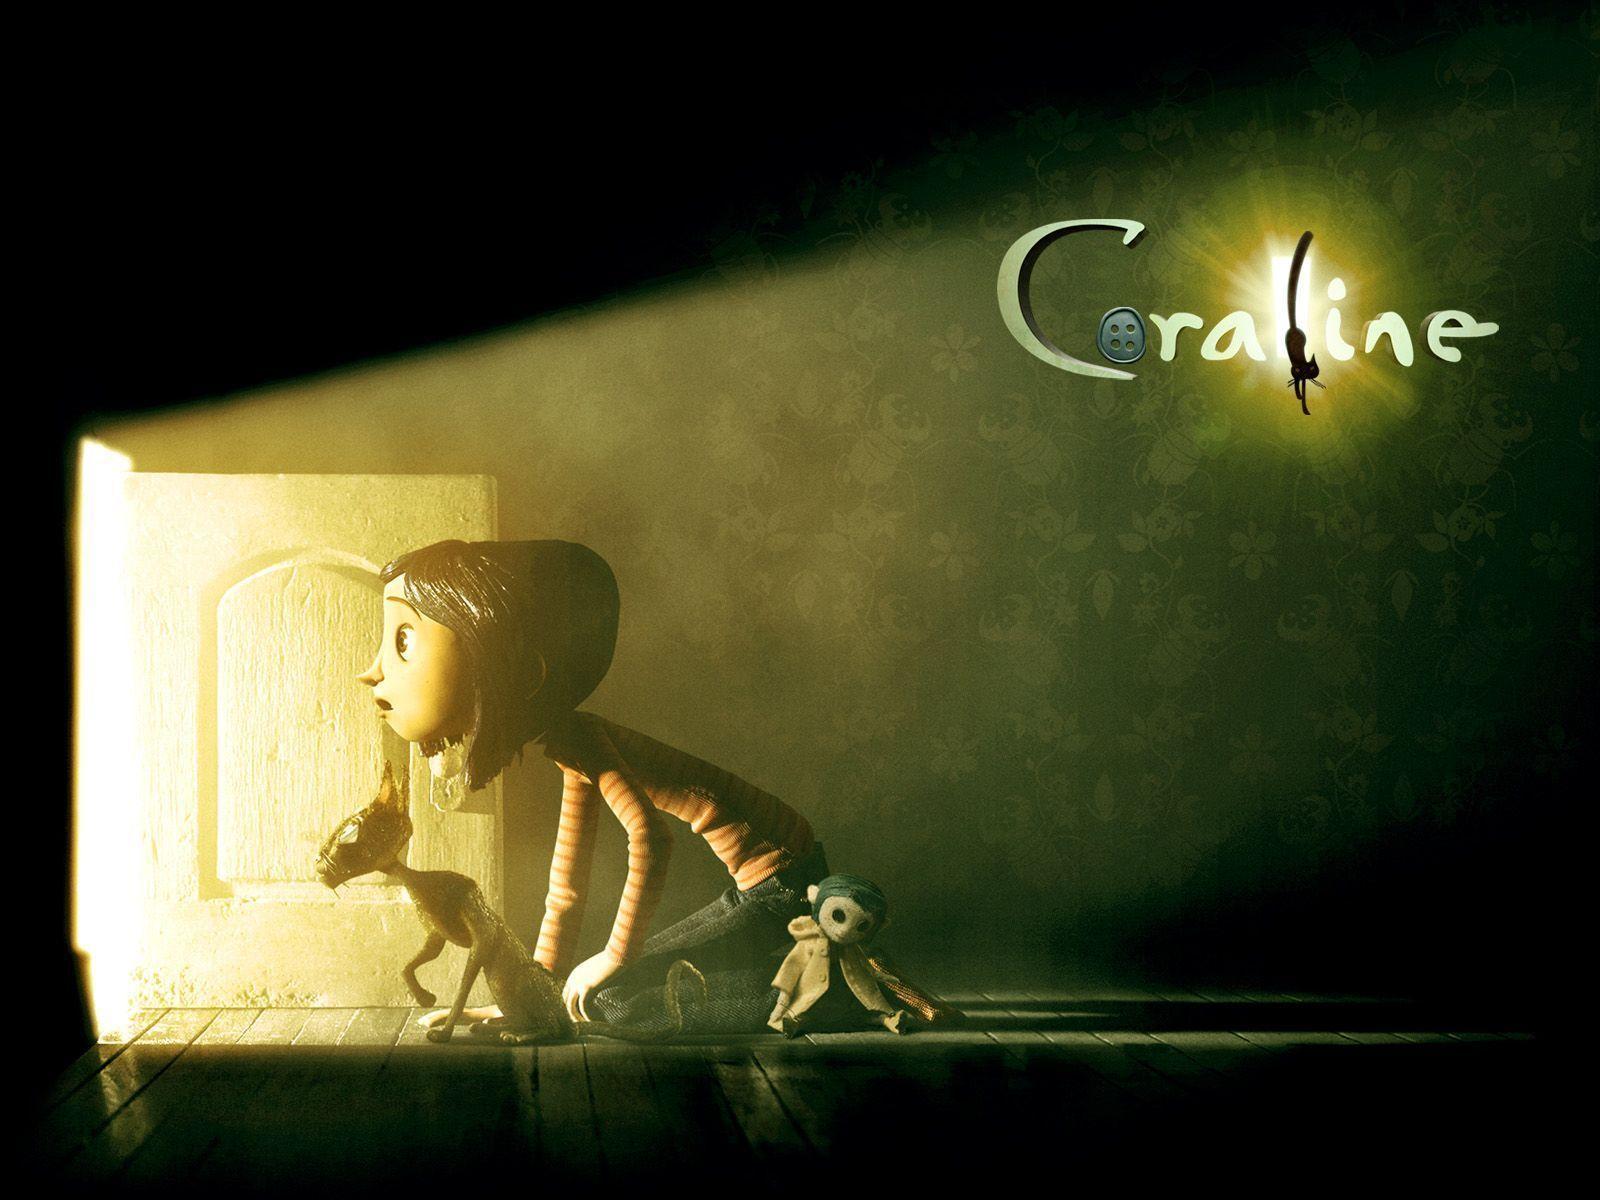 Coraline wallpaper and image, picture, photo